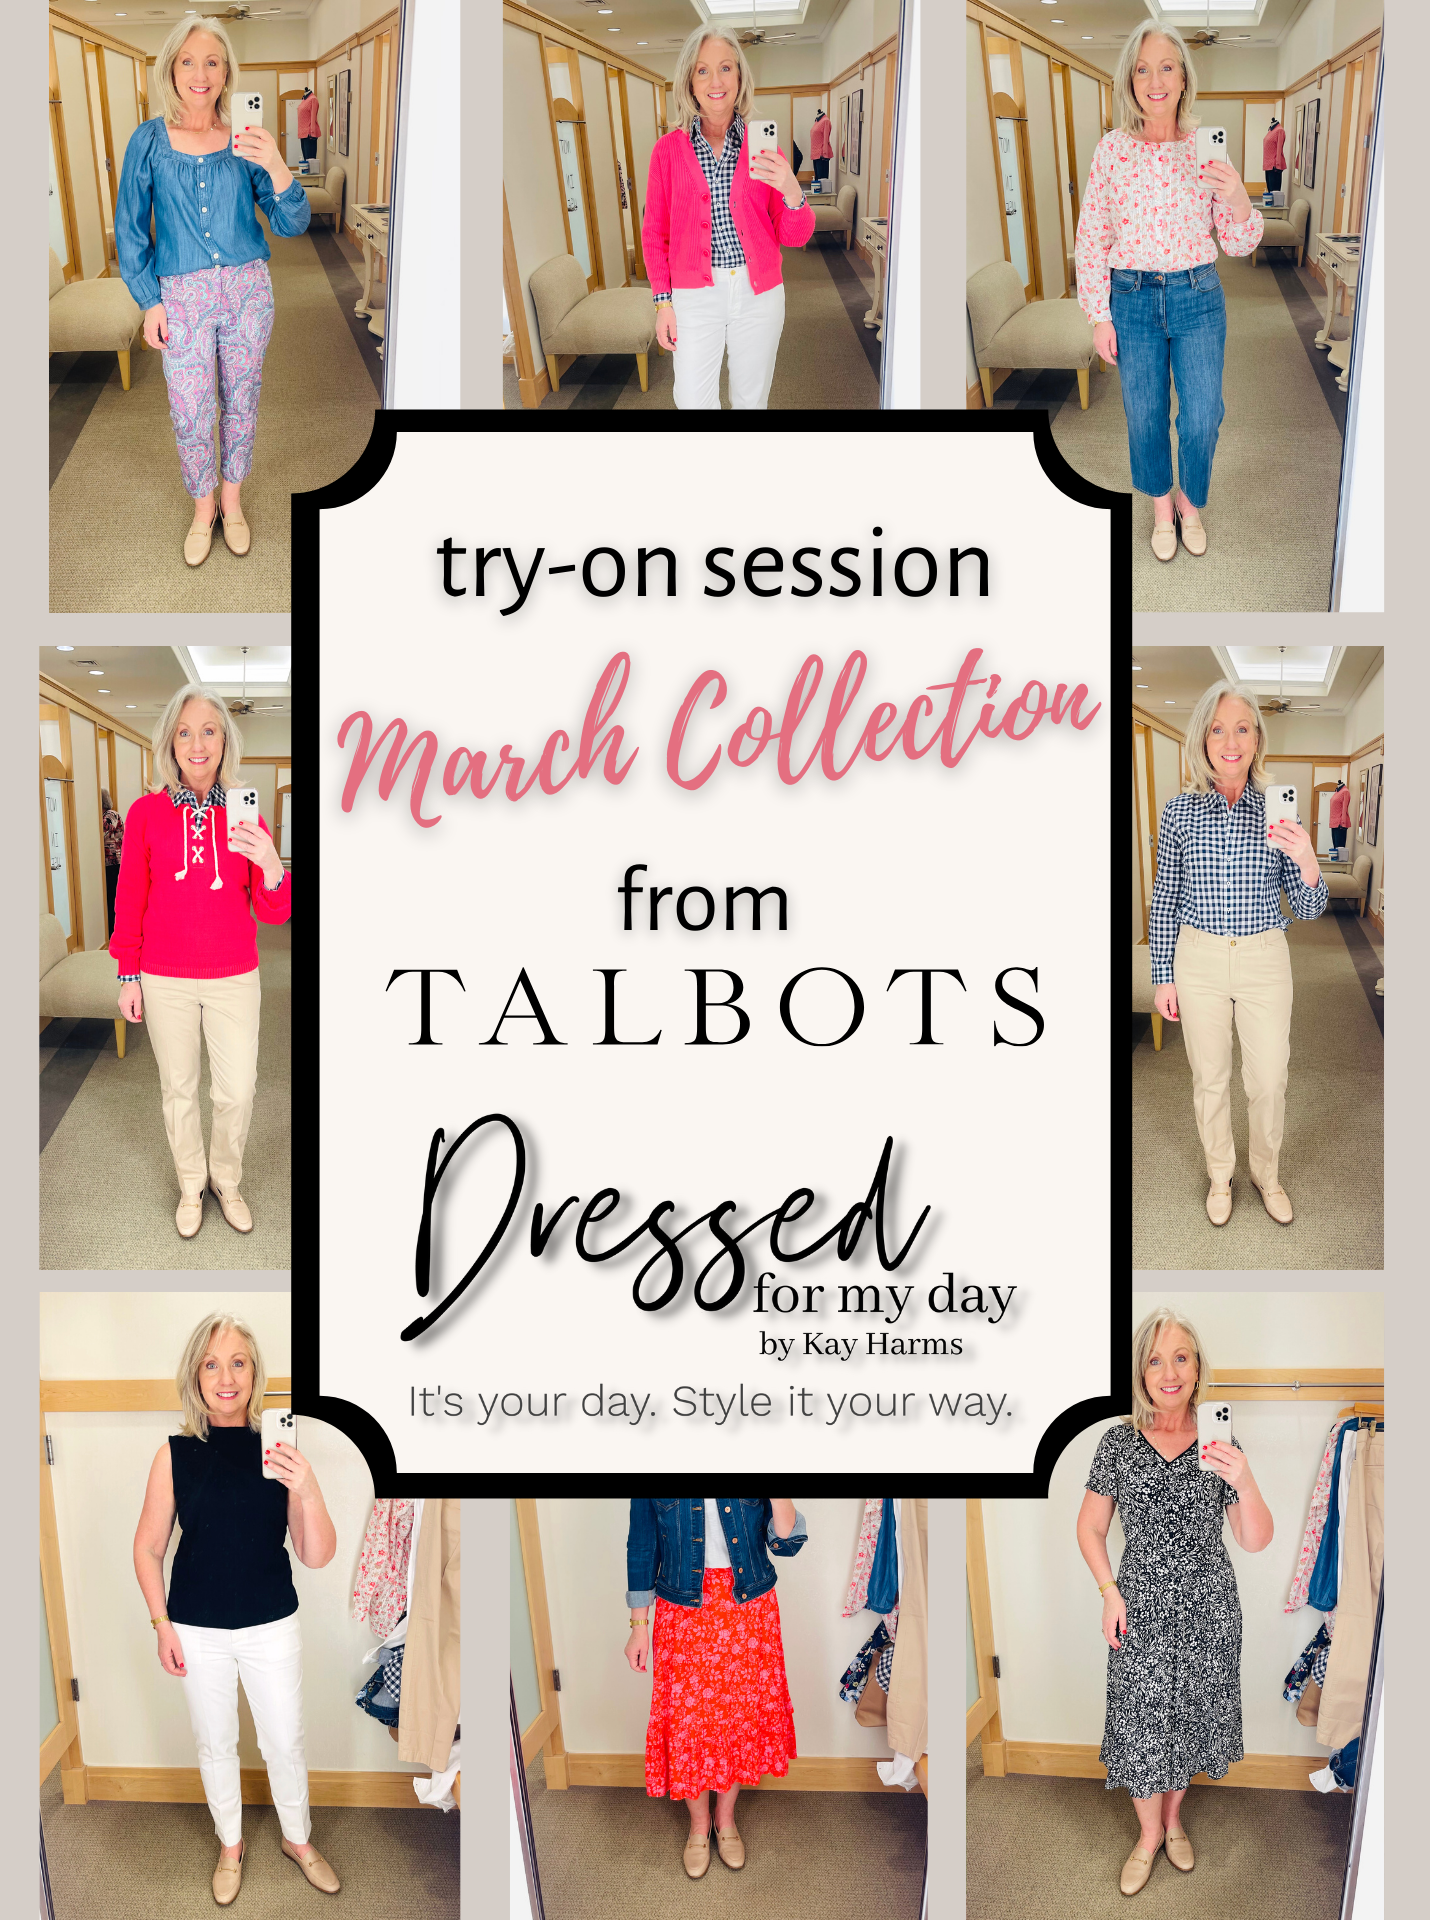 Try-On session Talbots